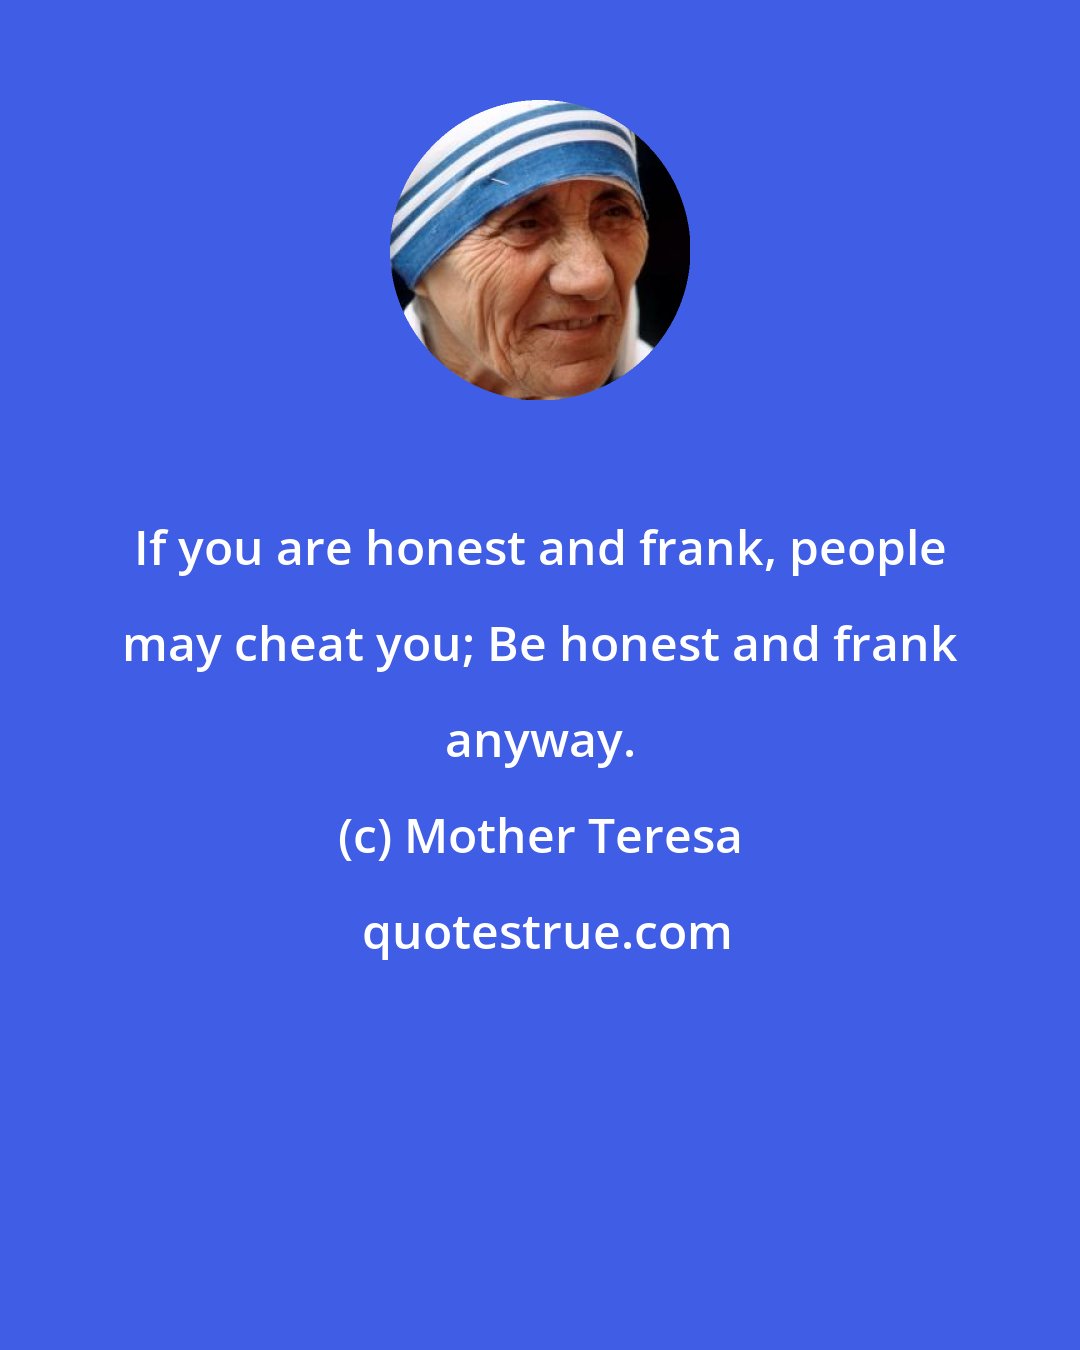 Mother Teresa: If you are honest and frank, people may cheat you; Be honest and frank anyway.